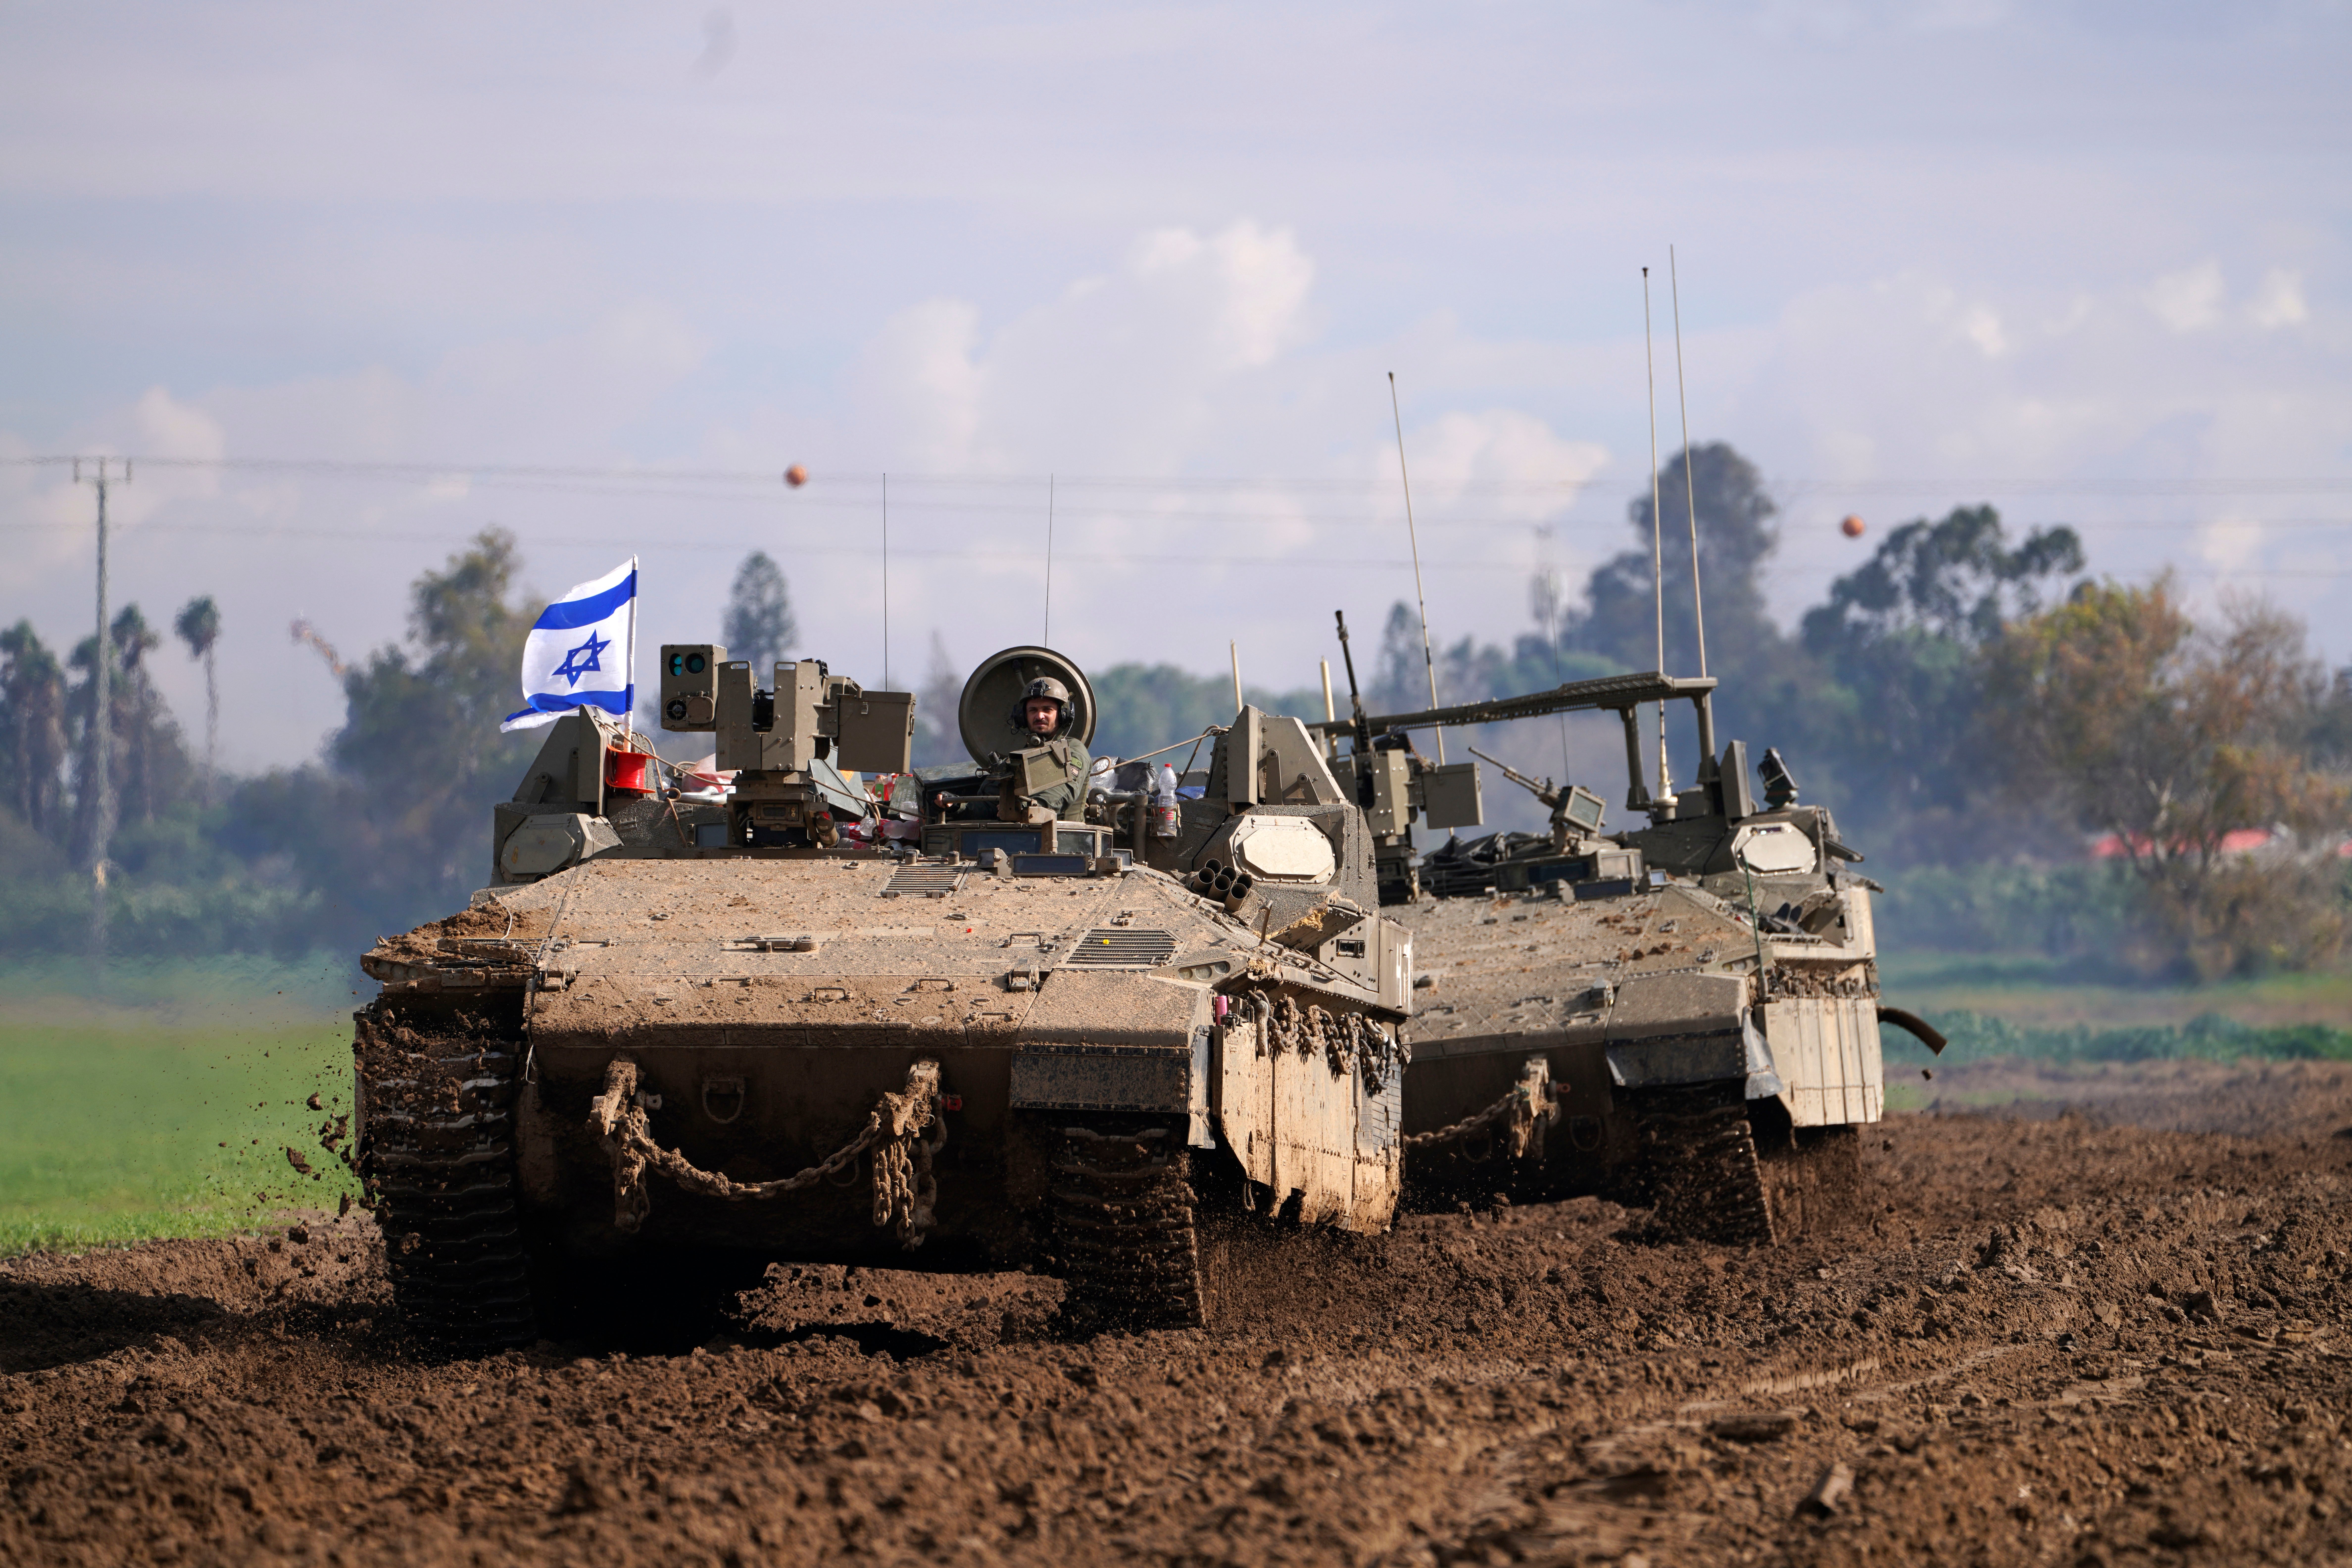 Israeli soldiers went into Gaza within days of the Hamas attack